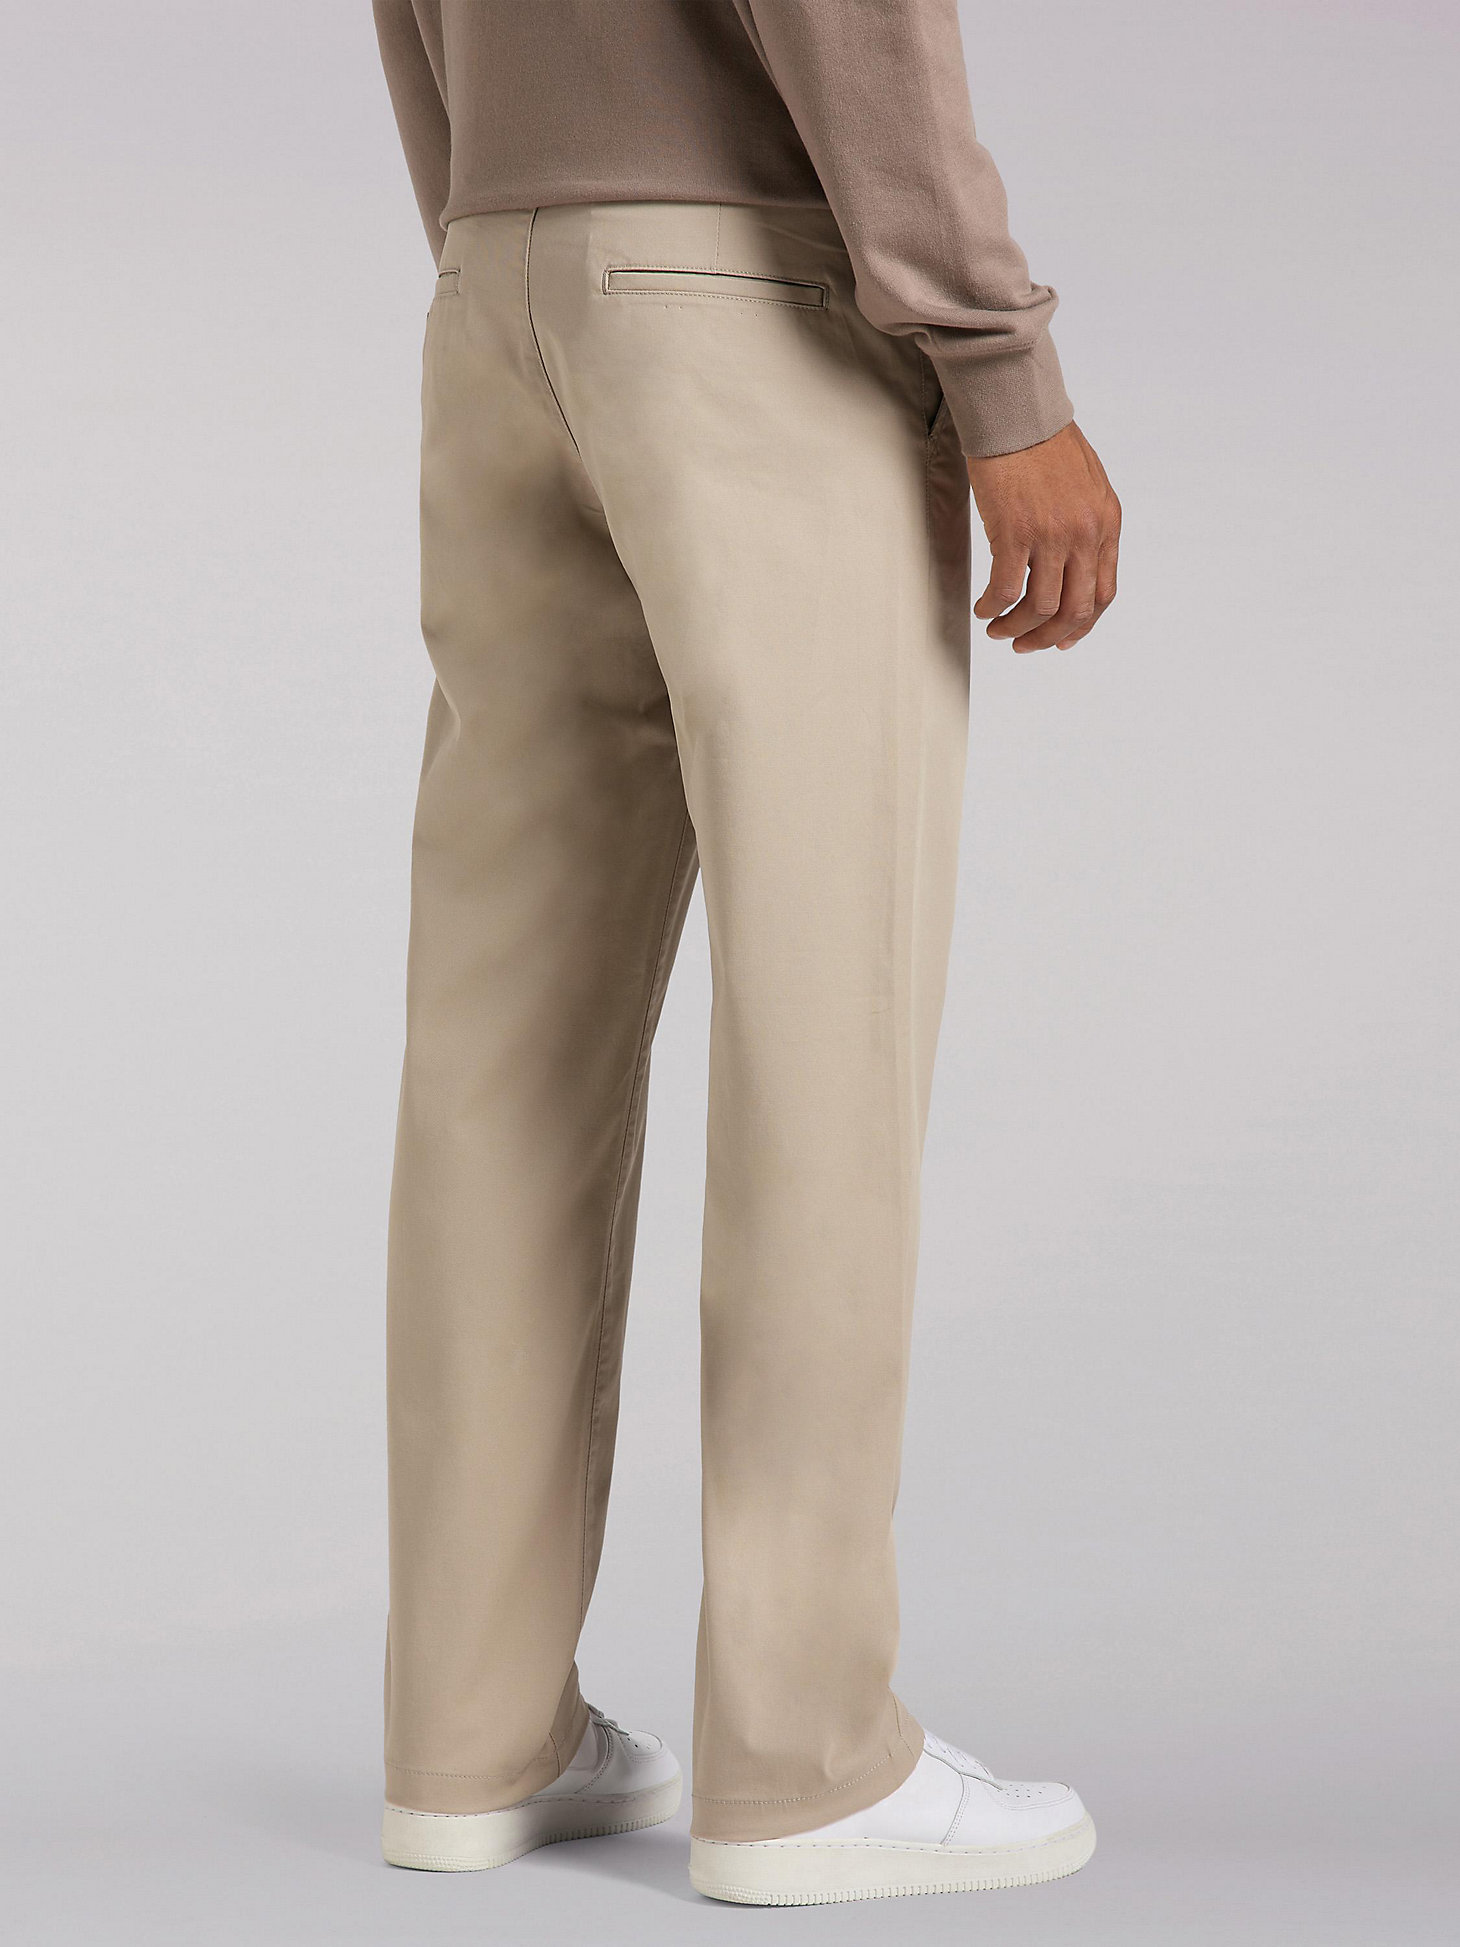 Men's European Collection Chetopa Relaxed Fit Chino in Stone alternative view 2